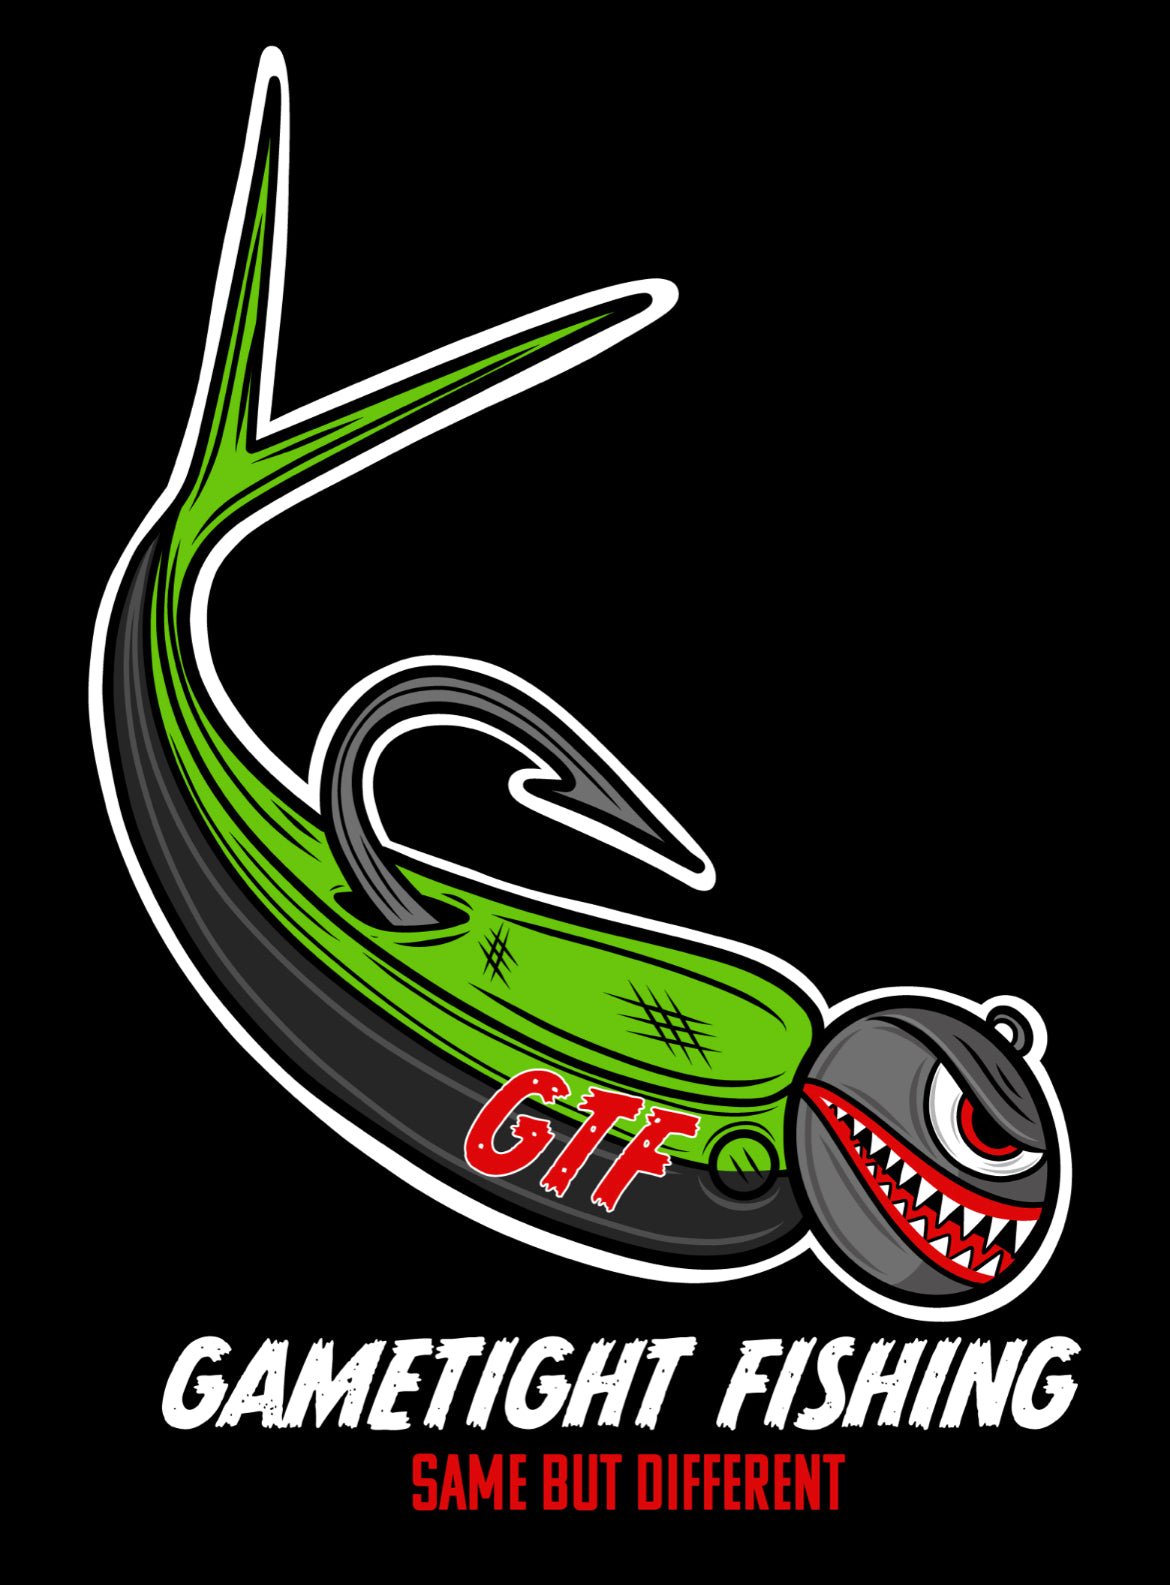 Premium Custom Fishing Baits for Trout, Bass, and More – Gametight Fishing